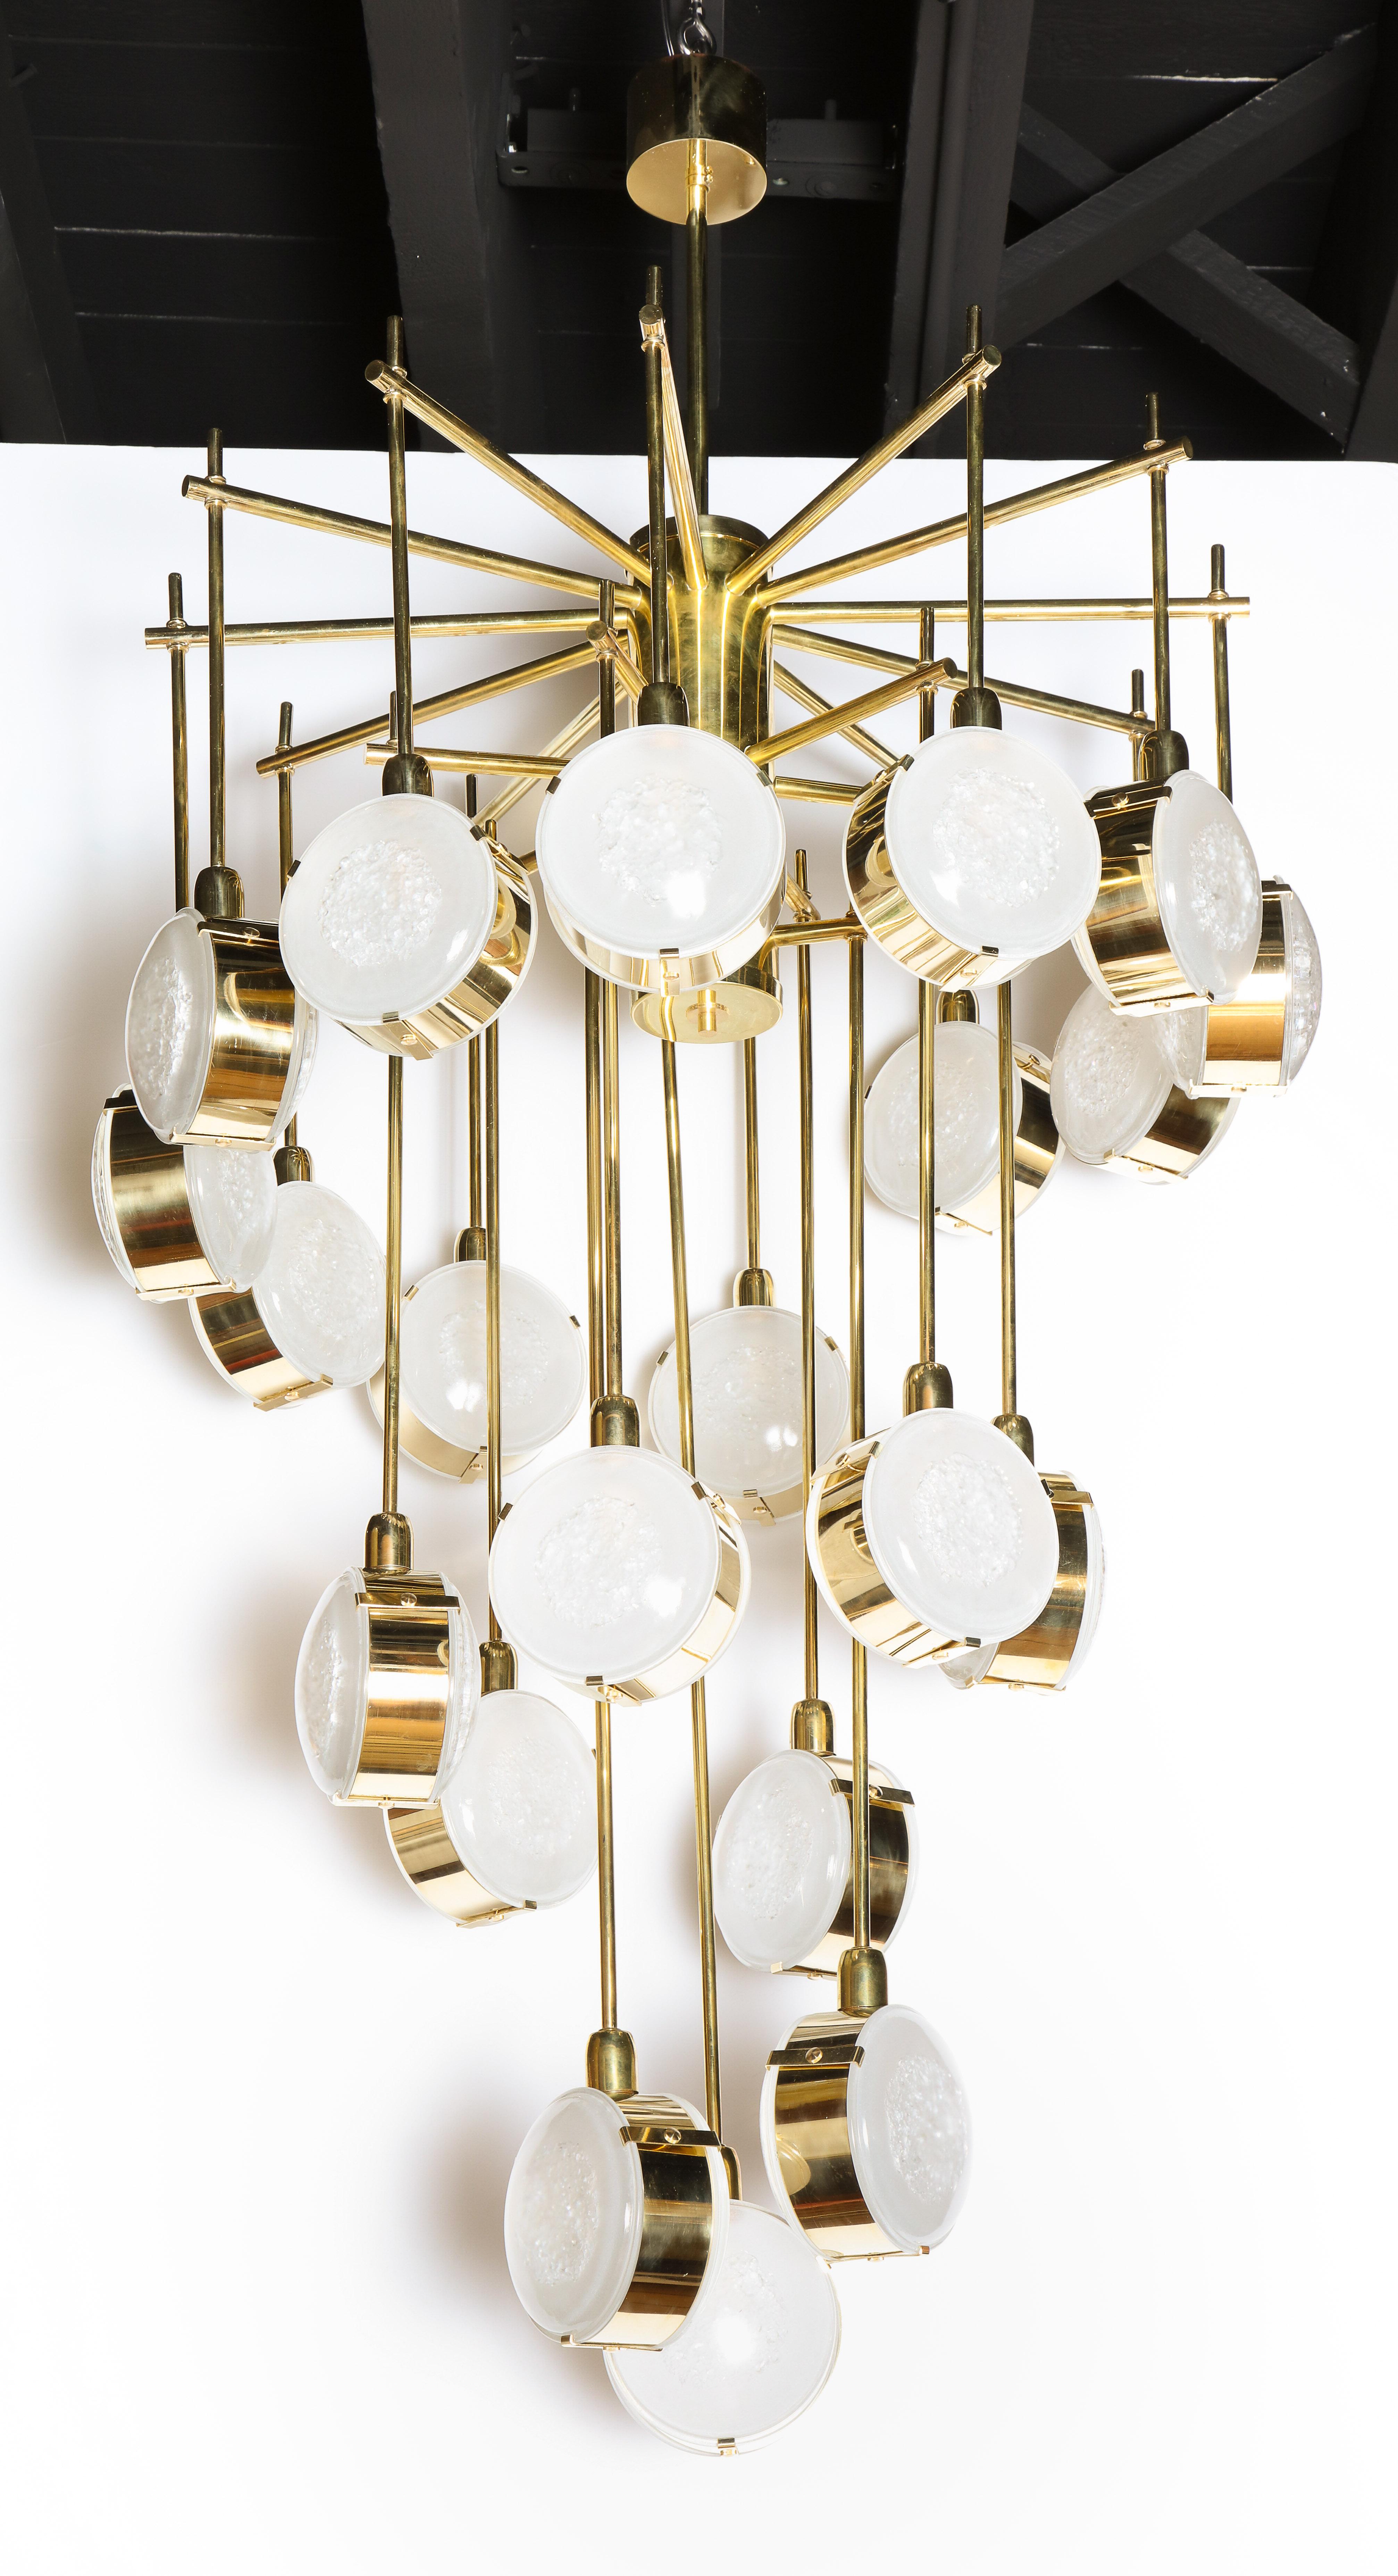 In the spirit of Max Ingrand, this cascading chandelier is made of solid natural brass rods that turn and cascade like a spiral staircase. Double sided texture opaque Murano glass globes or discs are attached at the end of each rod. Inside each